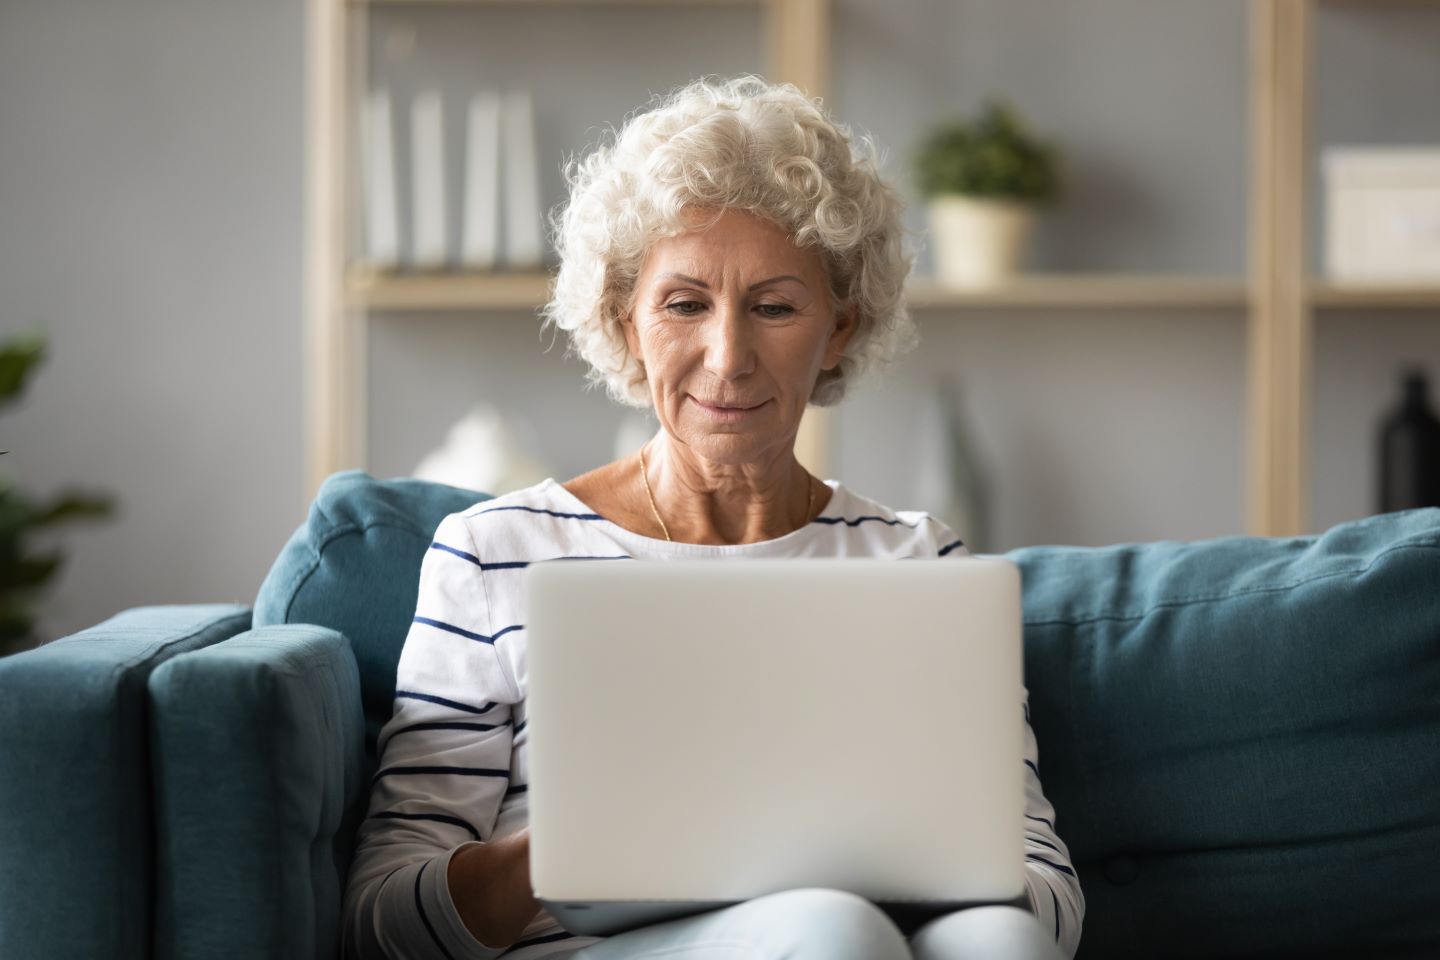 An elderly woman with curly gray hair is sitting on a teal sofa, using a laptop. She appears focused and content as she looks at the screen